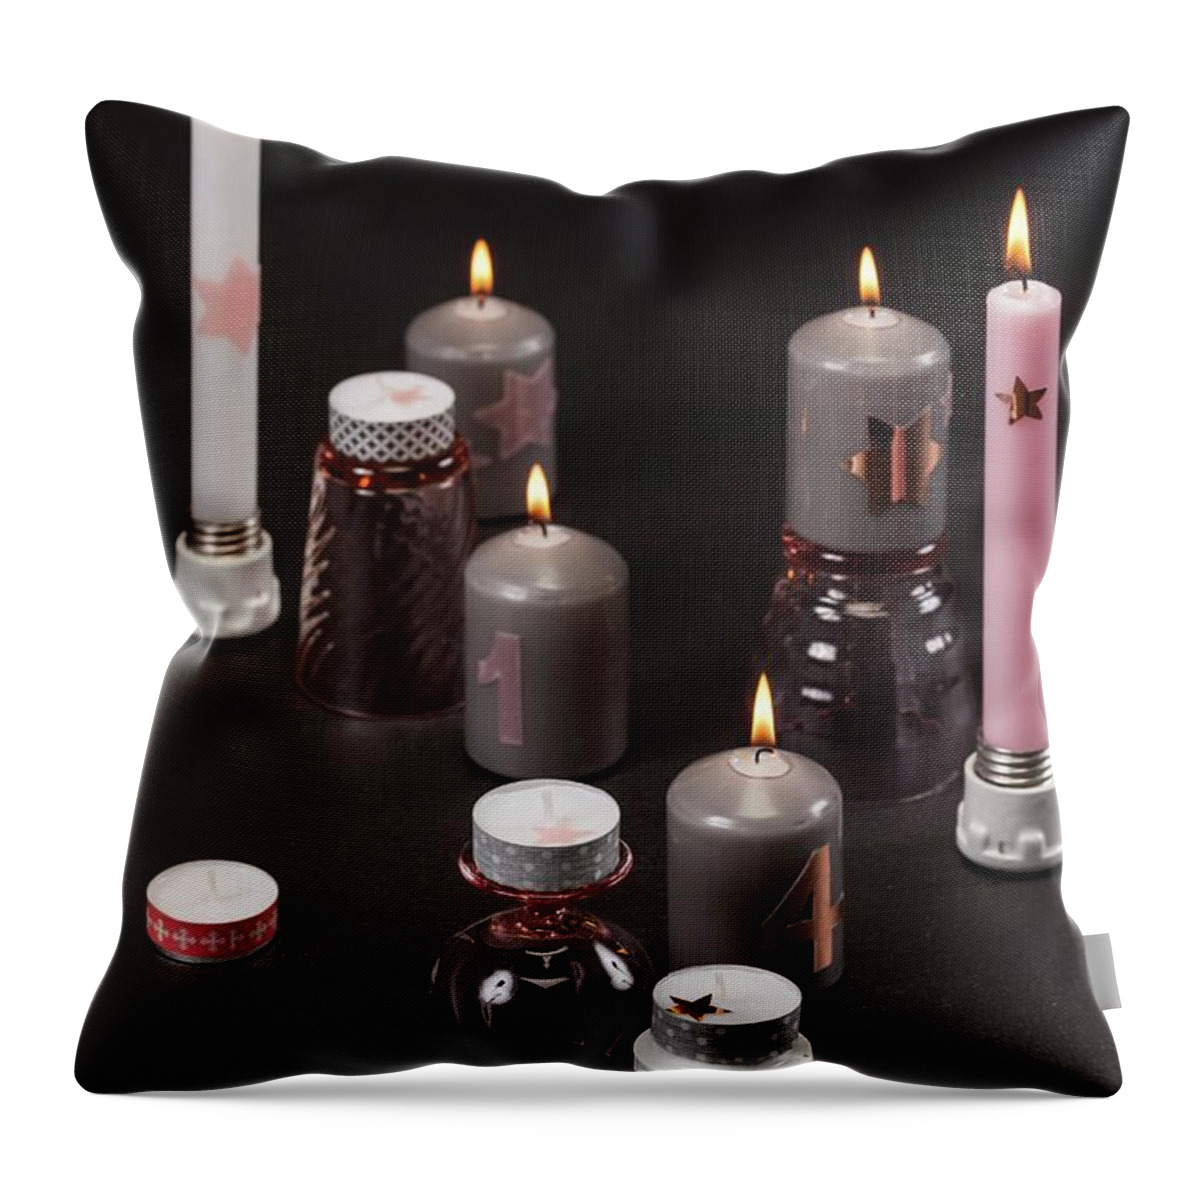 Ip_11393940 Throw Pillow featuring the photograph Festive Candlesticks Made From Upturned Drinking Glasses And Light Bulb Sockets by Studio27neun